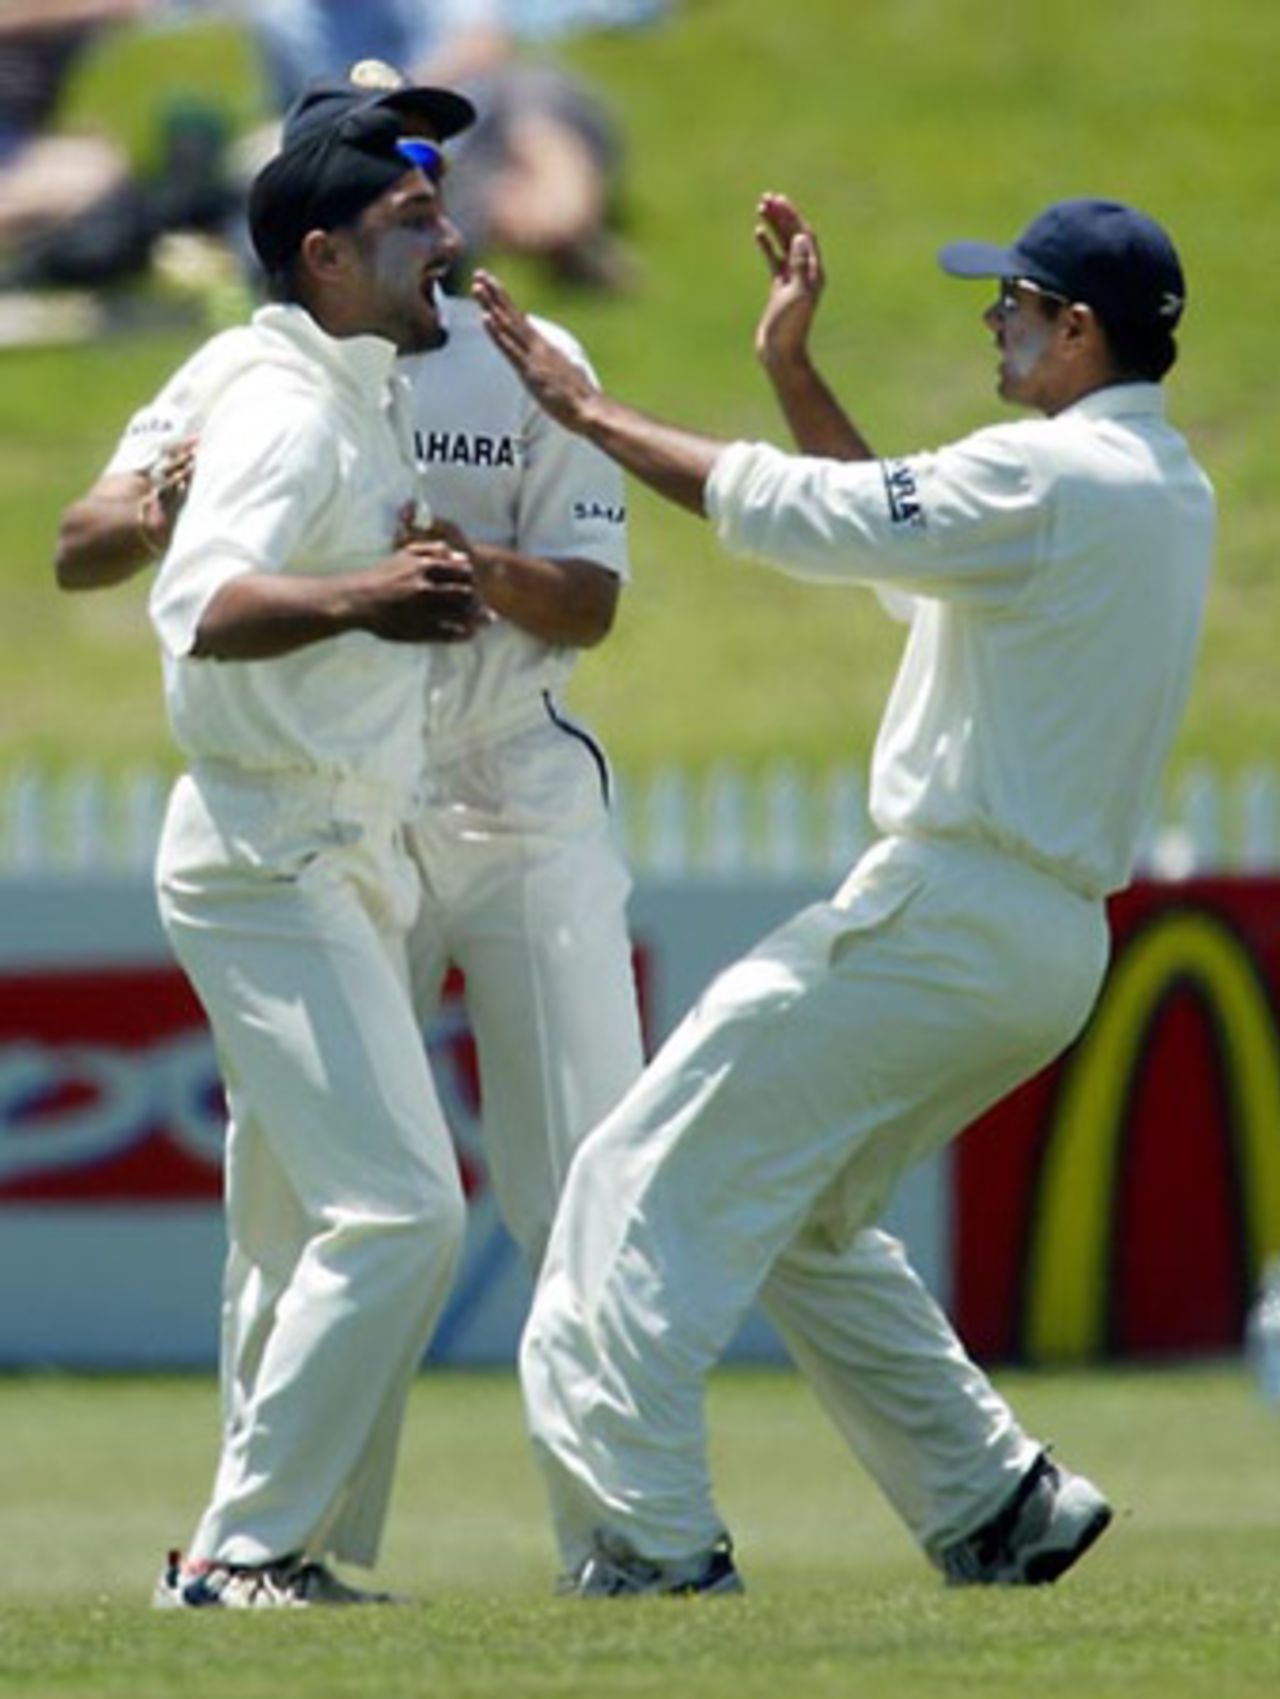 Indian fielder Harbhajan Singh (left) and team-mate Rahul Dravid celebrate the dismissal of New Zealand batsman Nathan Astle, caught by Harbhajan at backward point off the bowling of Nehra for 0 in his first innings. 2nd Test: New Zealand v India at Westpac Park, Hamilton, 19-23 December 2002 (21 December 2002).